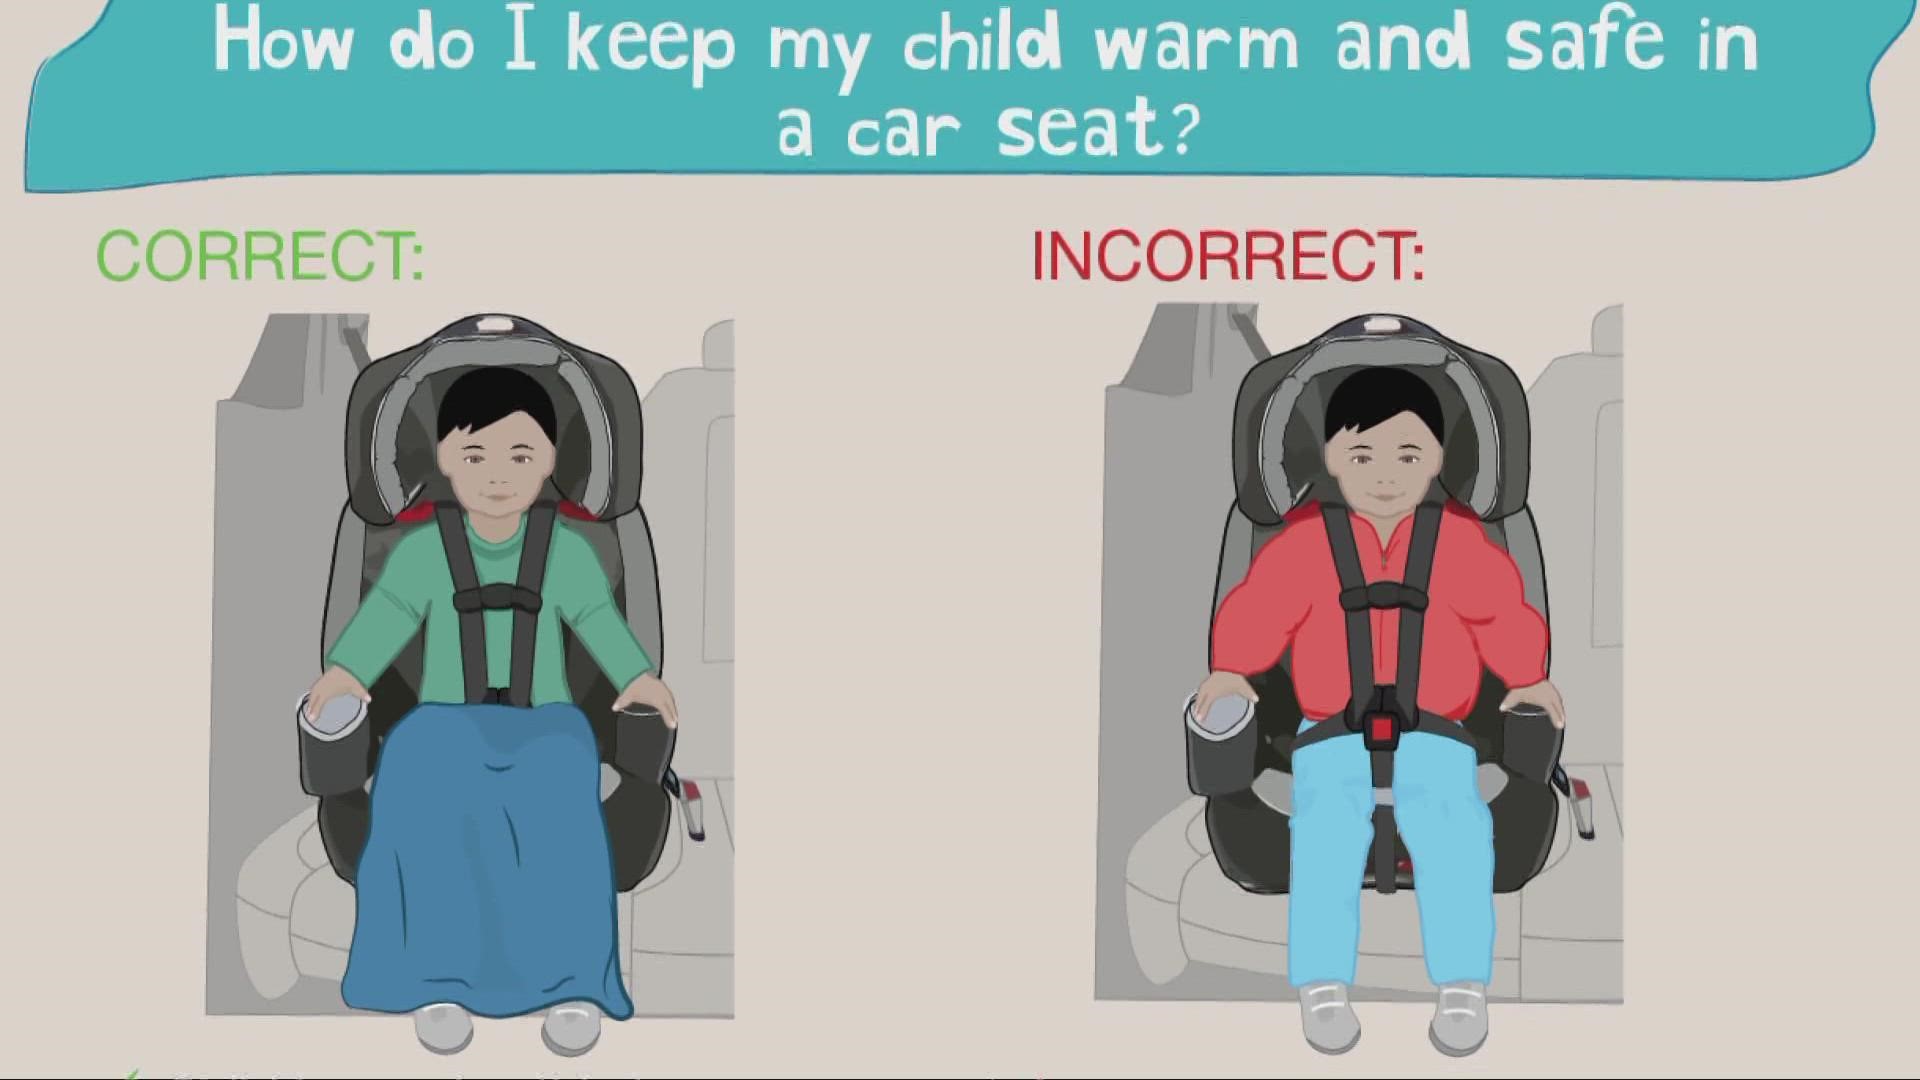 Experts are reminding parents about the danger of putting children in car seat with a puffy coat.